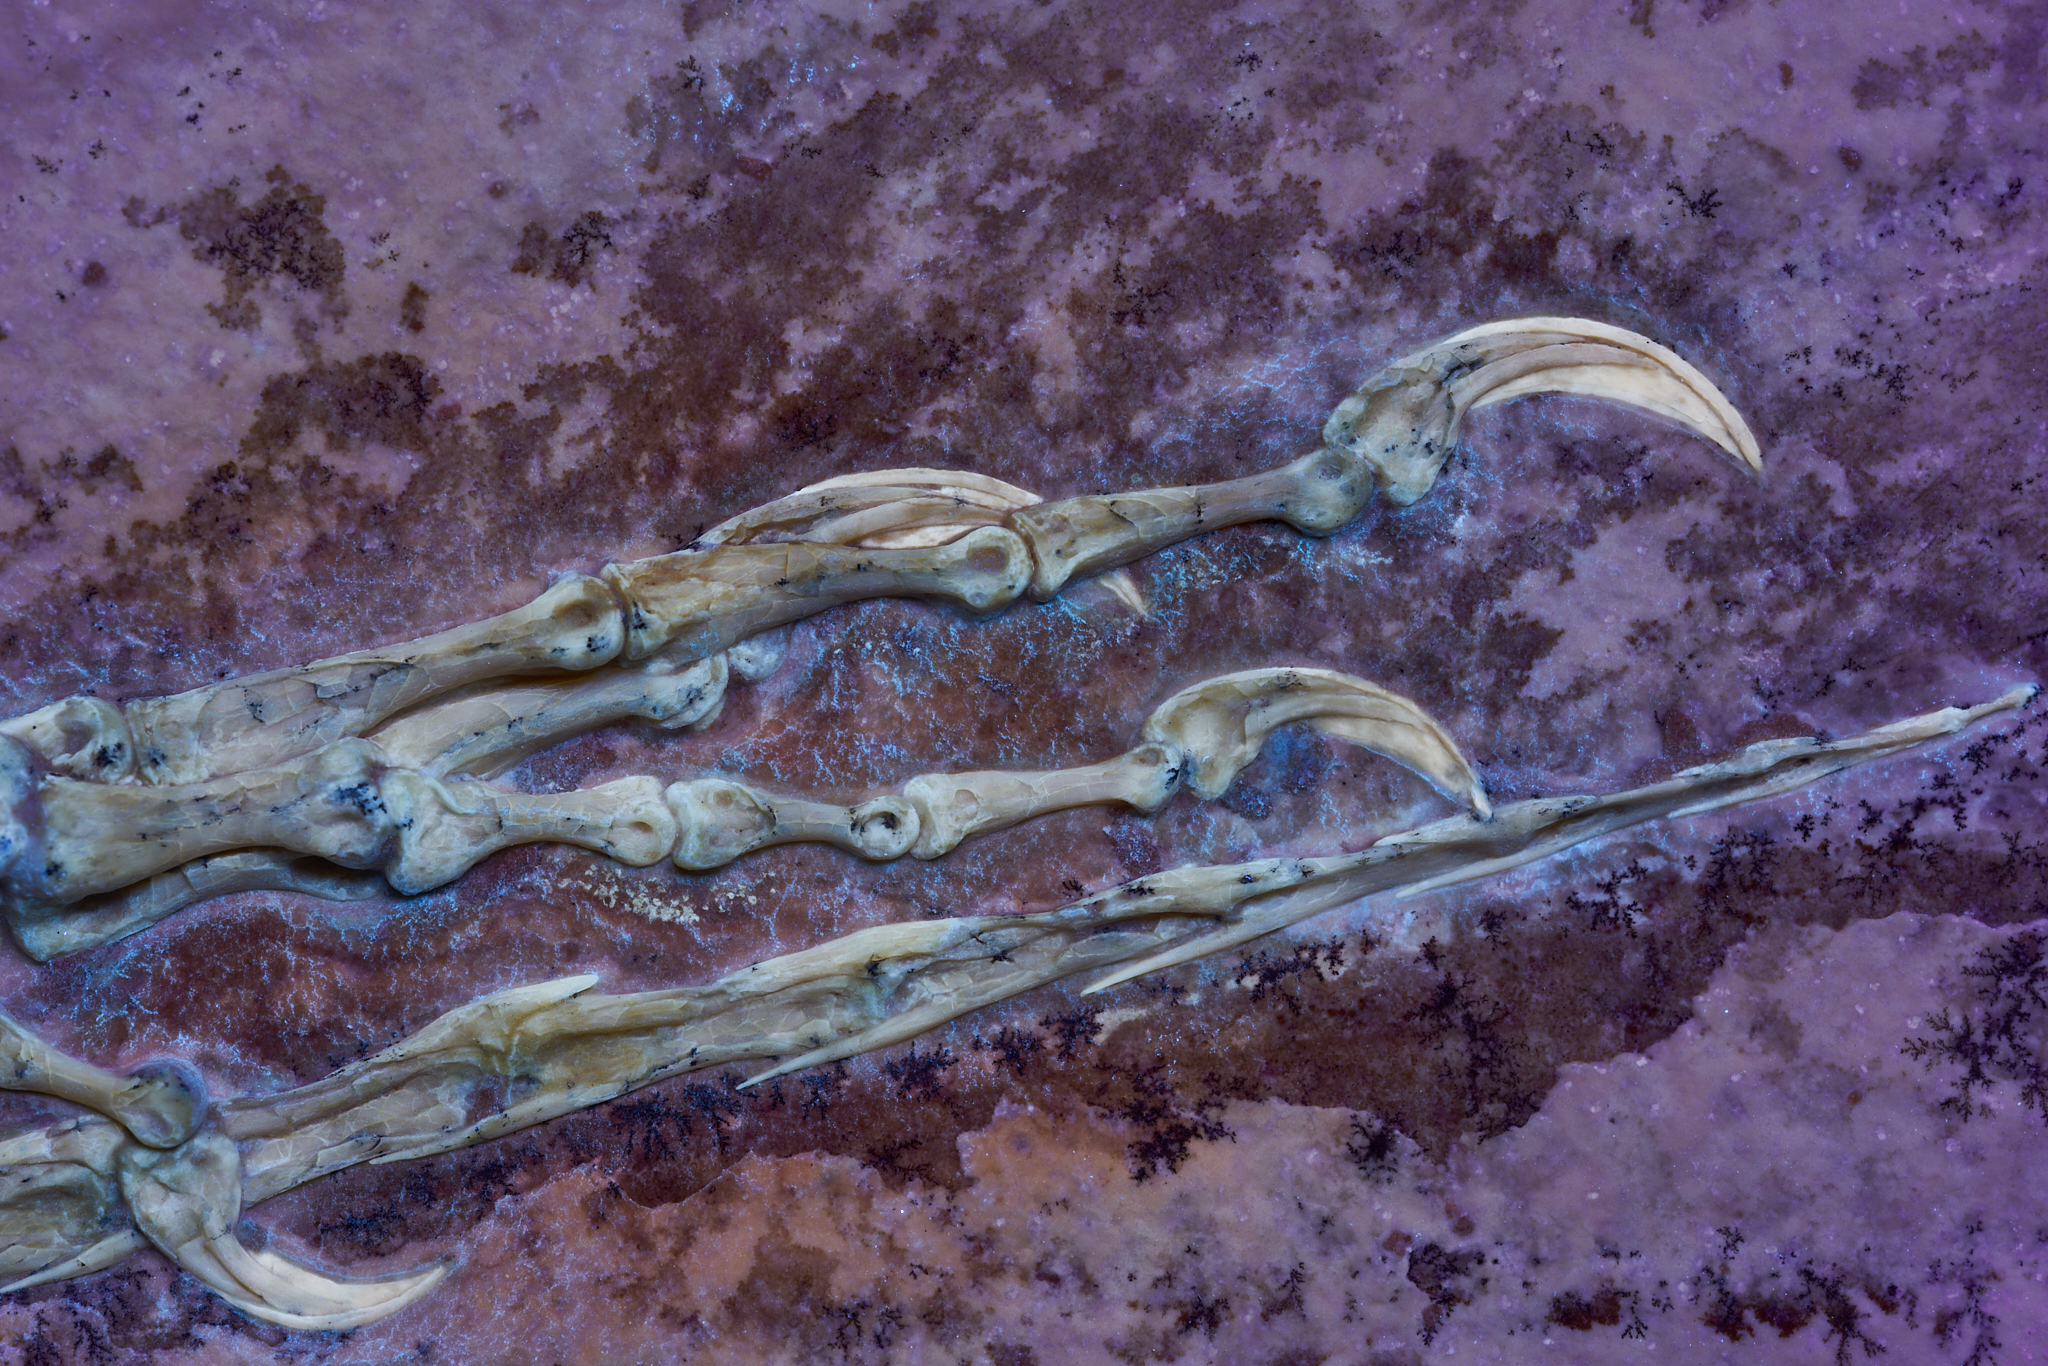 Fossil claws of Archaeopteryx, highlighted with a UV light to show detail